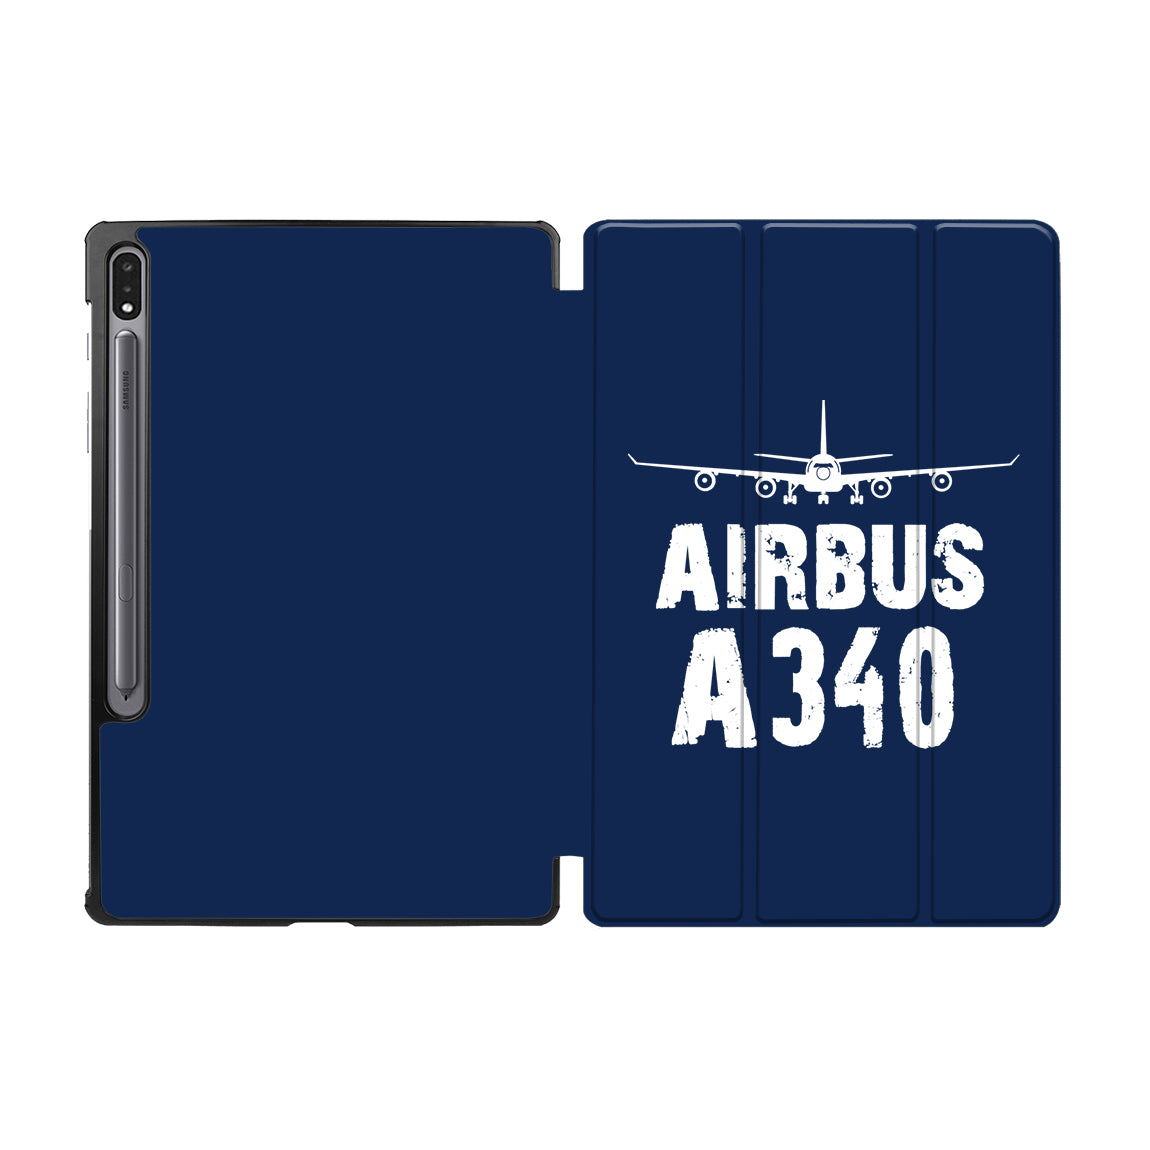 Airbus A340 & Plane Designed Samsung Tablet Cases